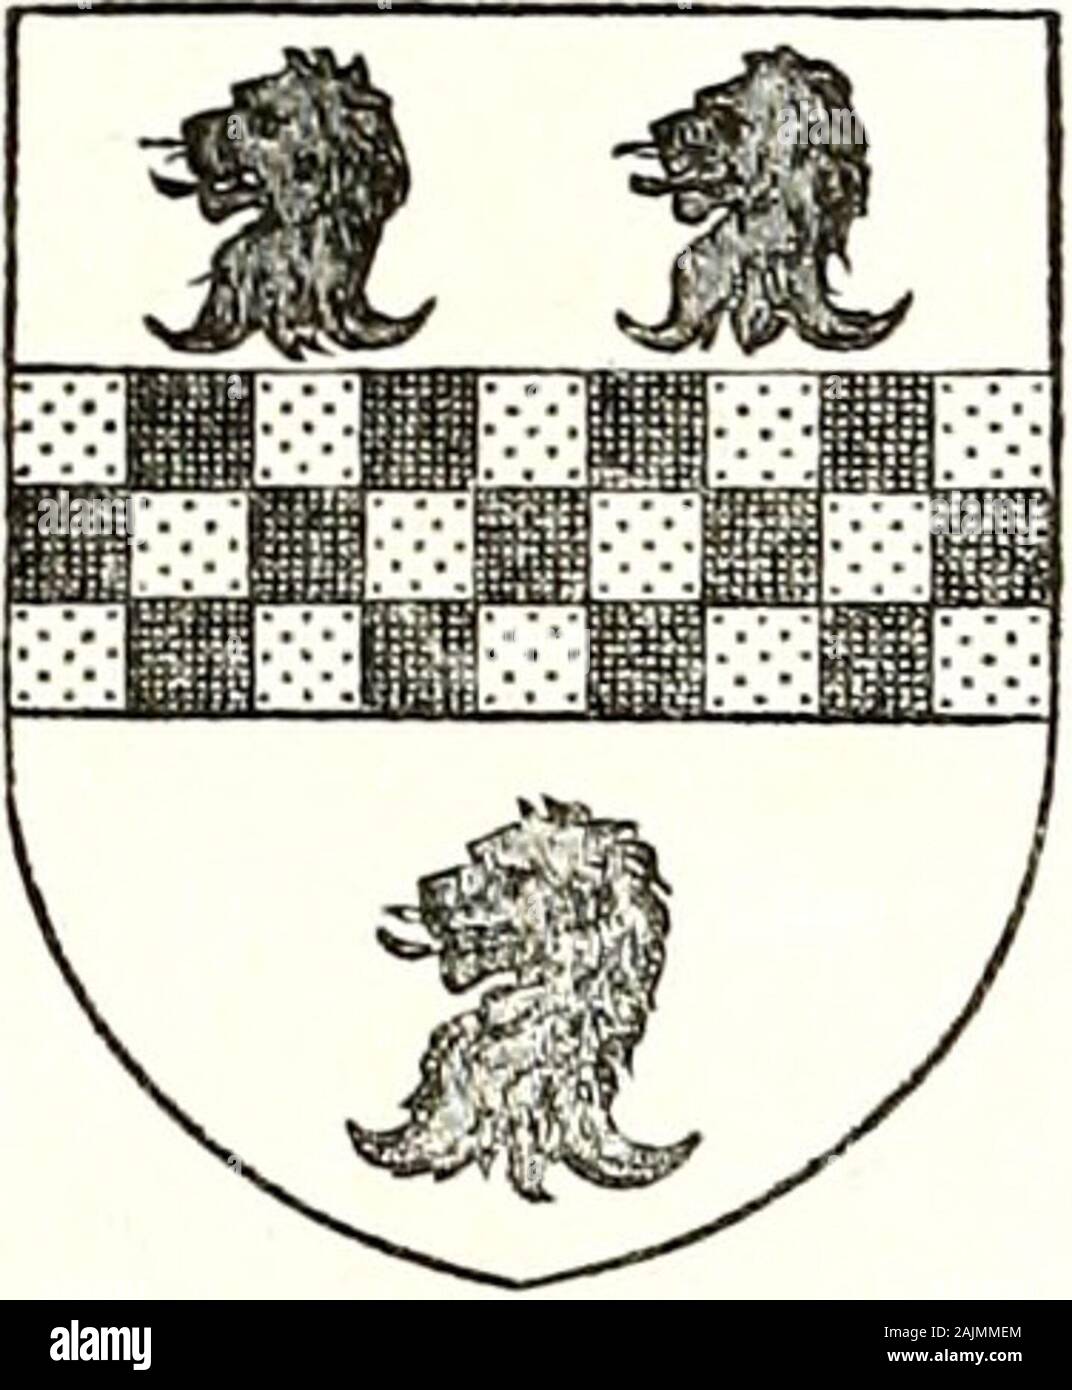 The Birkbecks of Westmorland and their descendants . Machell, the Westmorland antiquarian, who was a cousin of the HornbyBirkbecks, writing in 1664, quotes Dugdales Visitation: The Arms,Arg. a Fess chequy or, &lt;%? sab. Between three Lyons heads errased. Gules,but I believe this is a mistake in ye tracing it, for in all their Arms atthornby, the Fess is contercompone, or ^ azure, he bore 3 Lyons heads ^c.& sometimes he bore 2 Lyons heads in chiefe &lt;^ a F Bores head in bass :which I have seen confirmed in Visit. West. &lt;^ Cumb. circa temp. Hen. 8. In Dwnns Visitation of Wales and part of Stock Photo